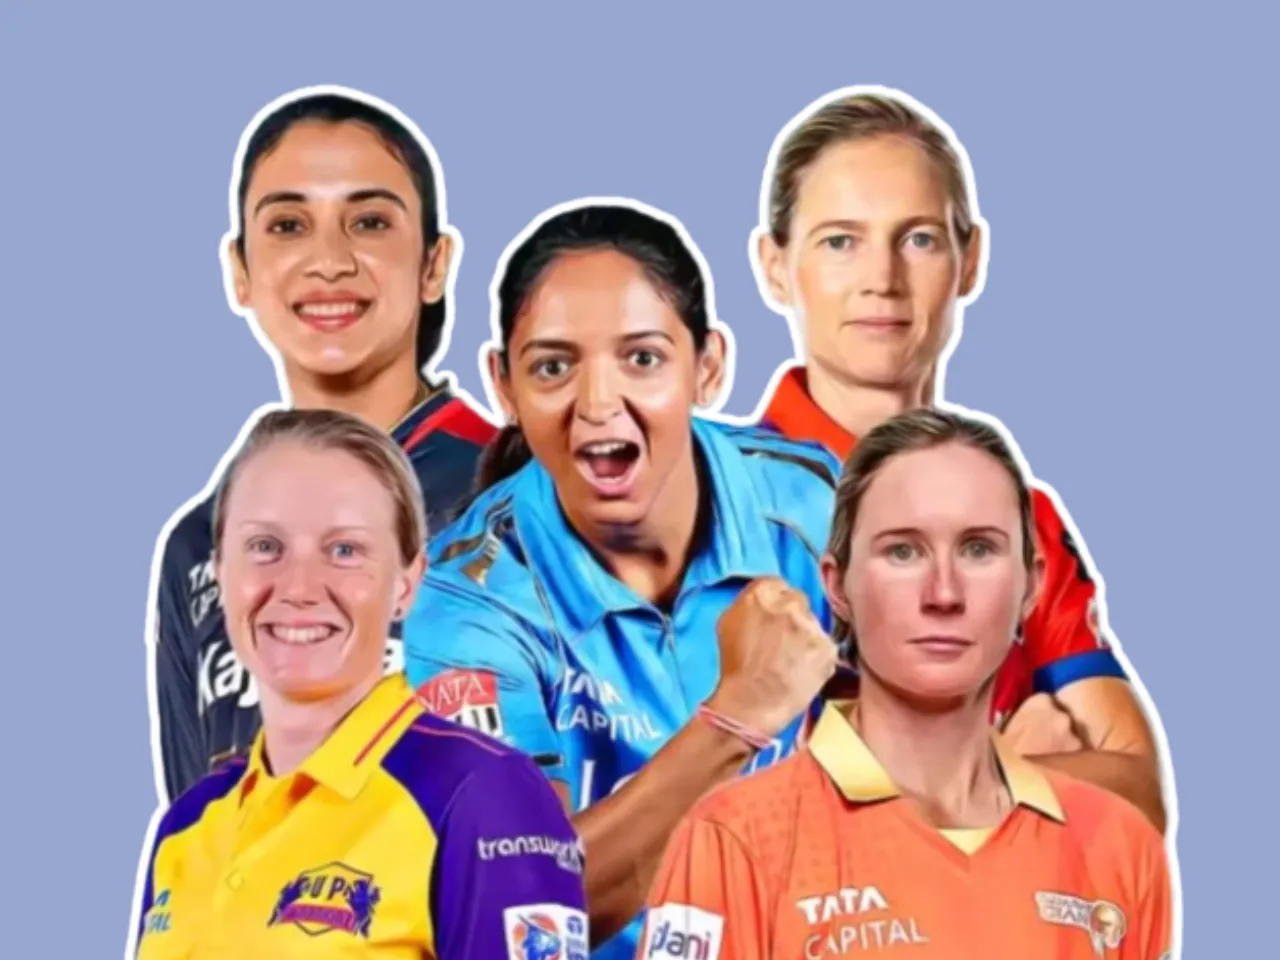 WPL Season 2 draws interest from FMCG, BFSI and women-centric advertisers